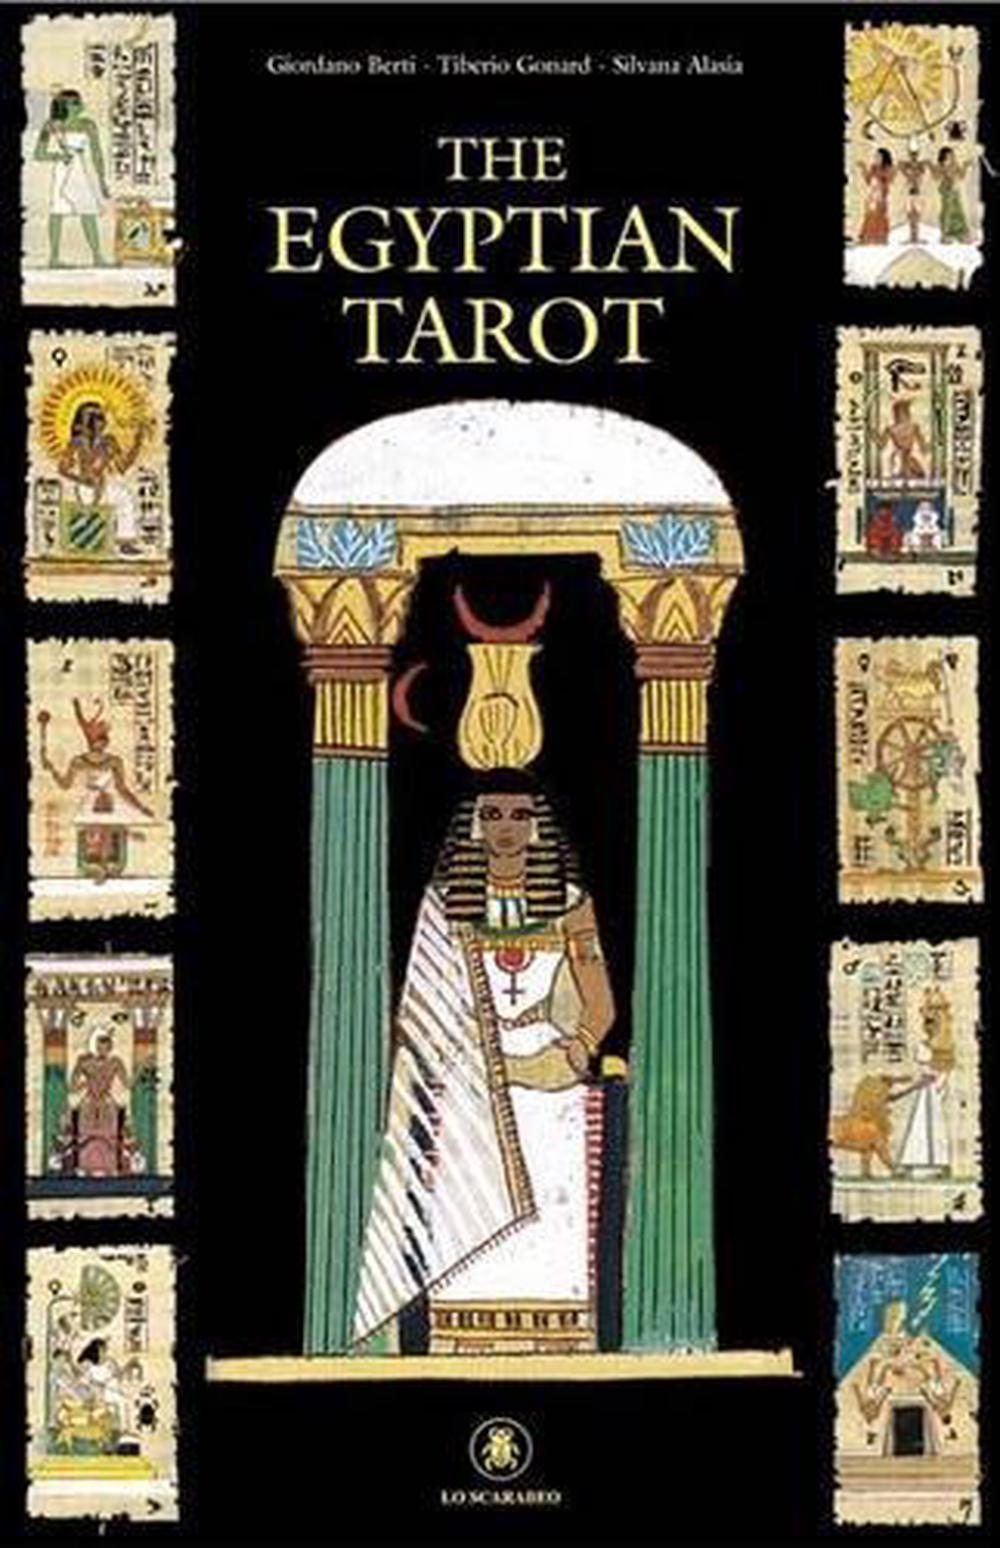 Tarot and Ancient Egypt – A Connection?